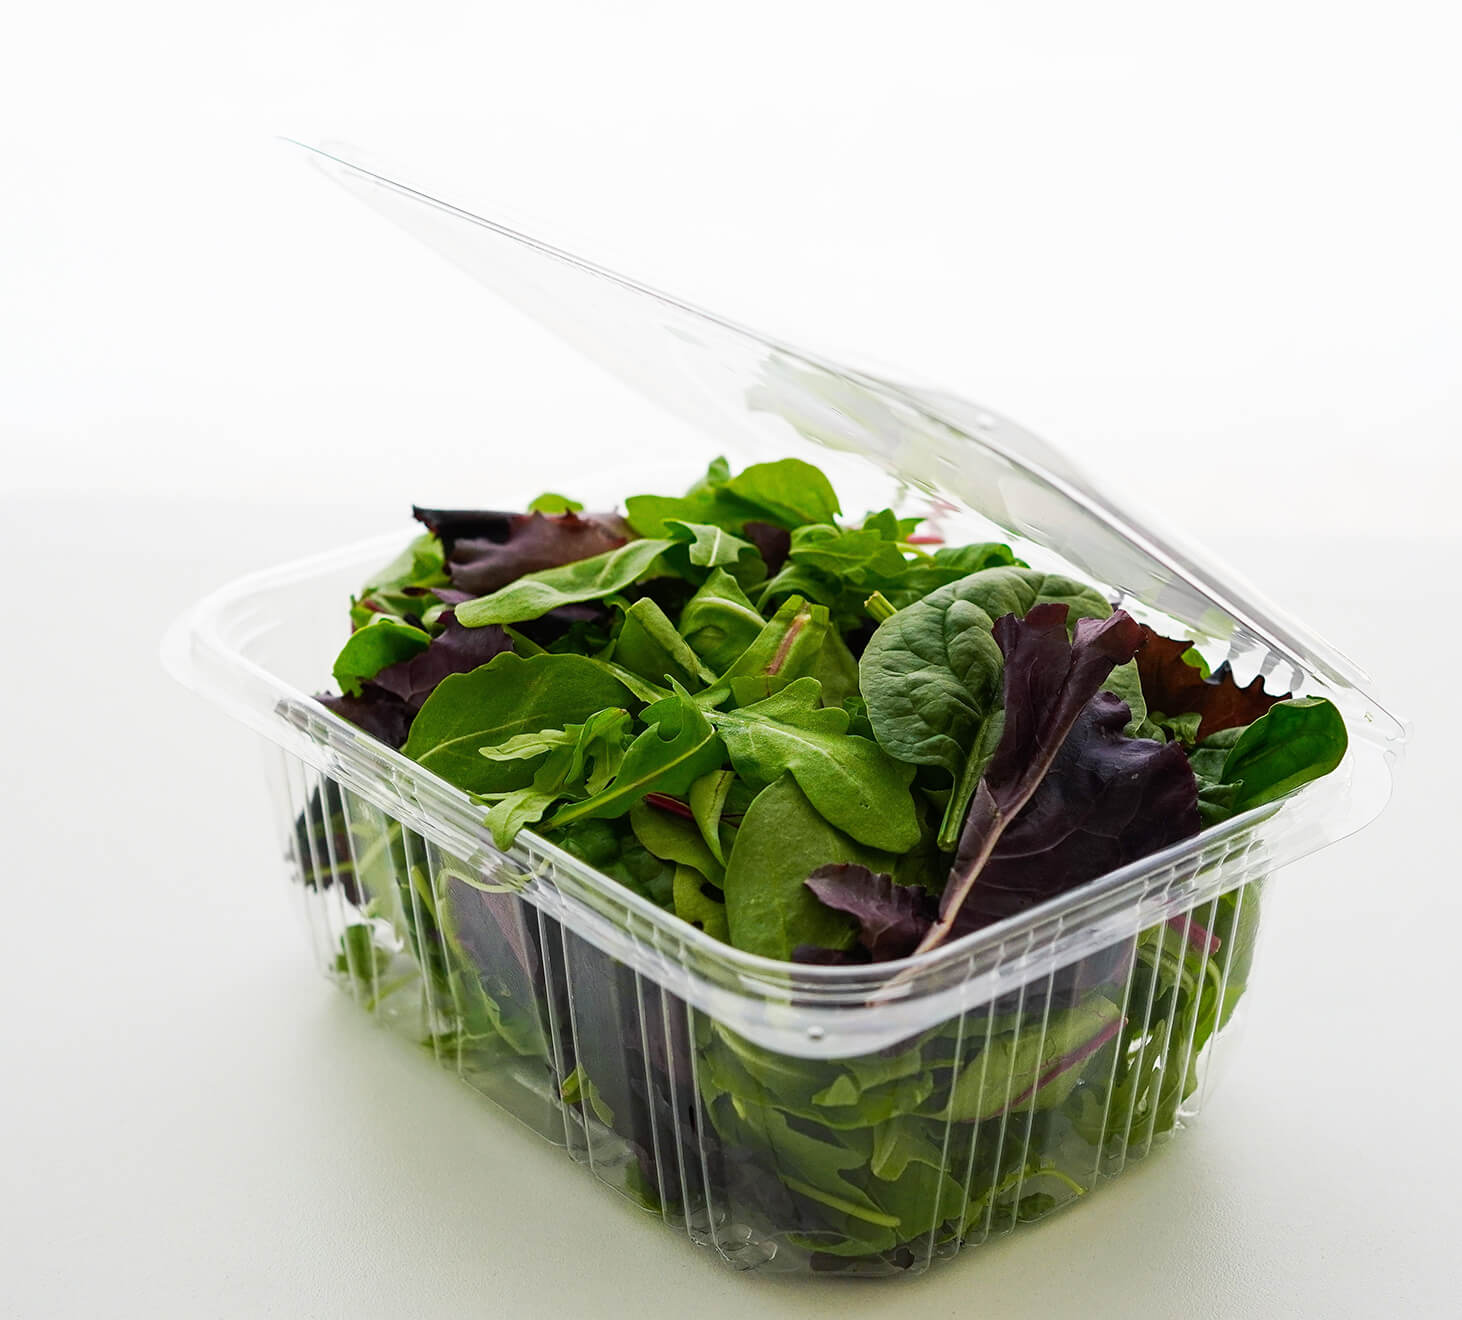 Clear plastic package containing mixed greens